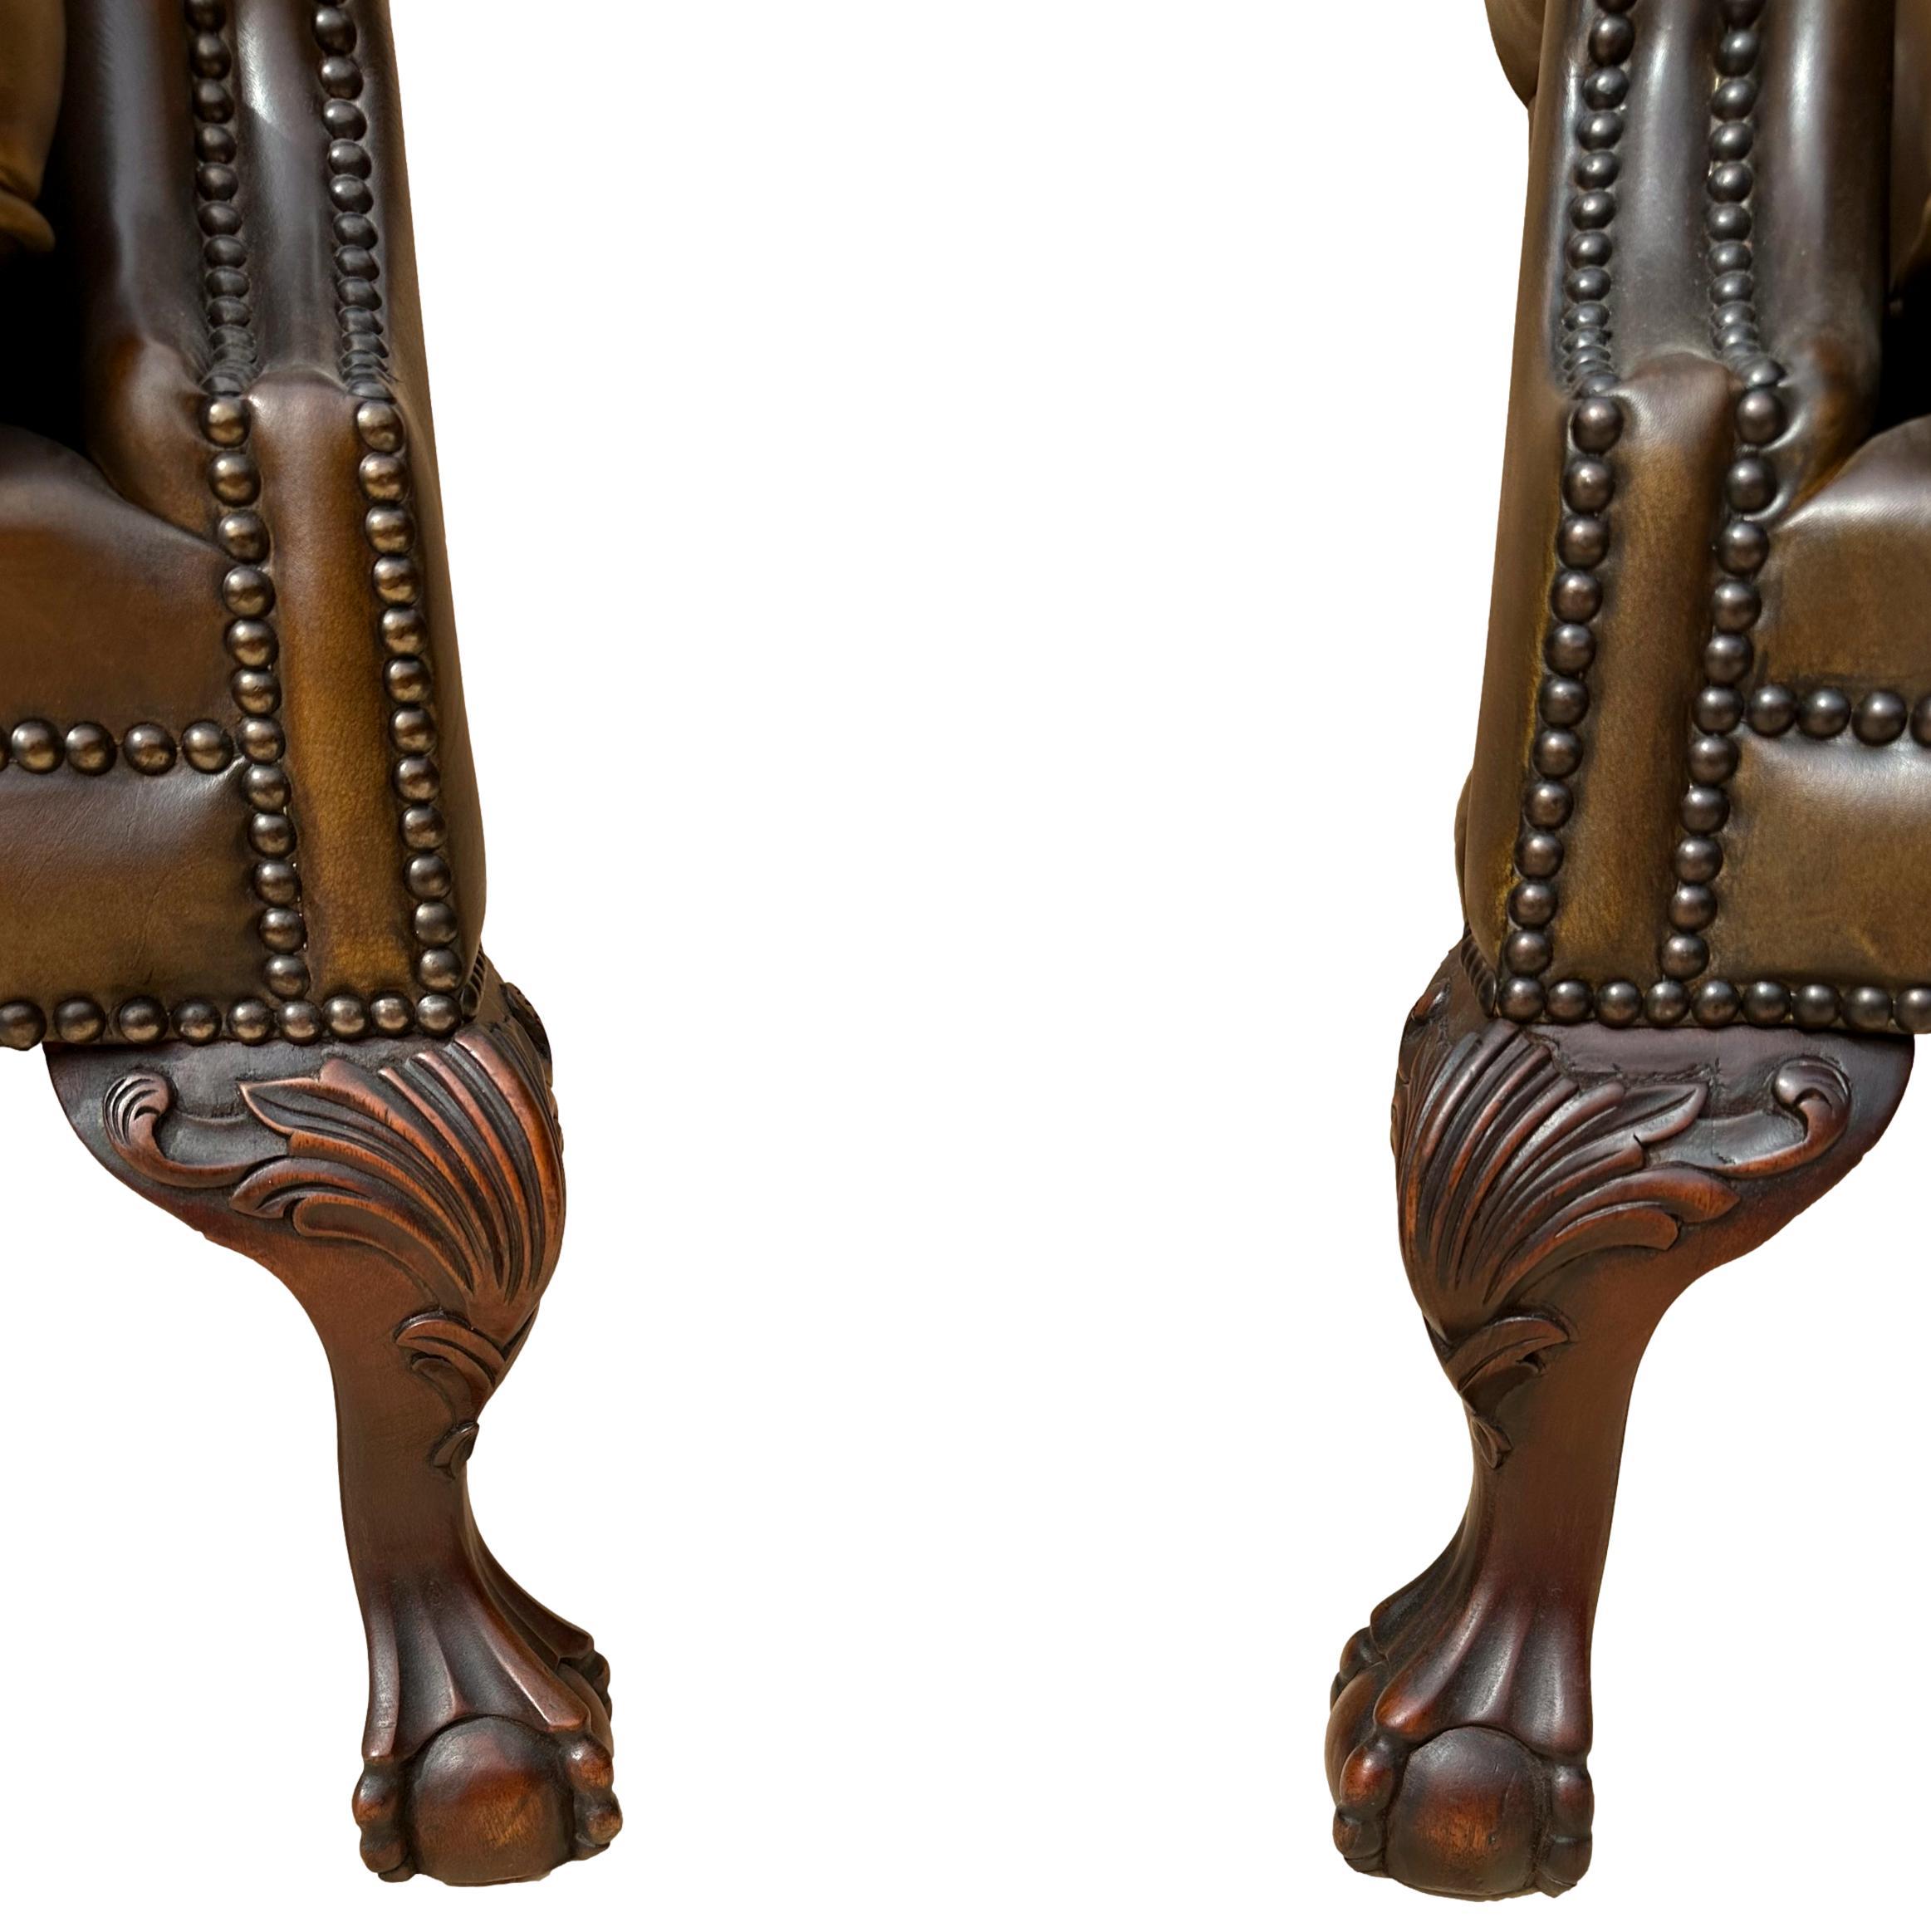 Pair of Leather Wing Back Tufted Chairs on Ball & Claw Feet, English, ca. 1920. For Sale 1